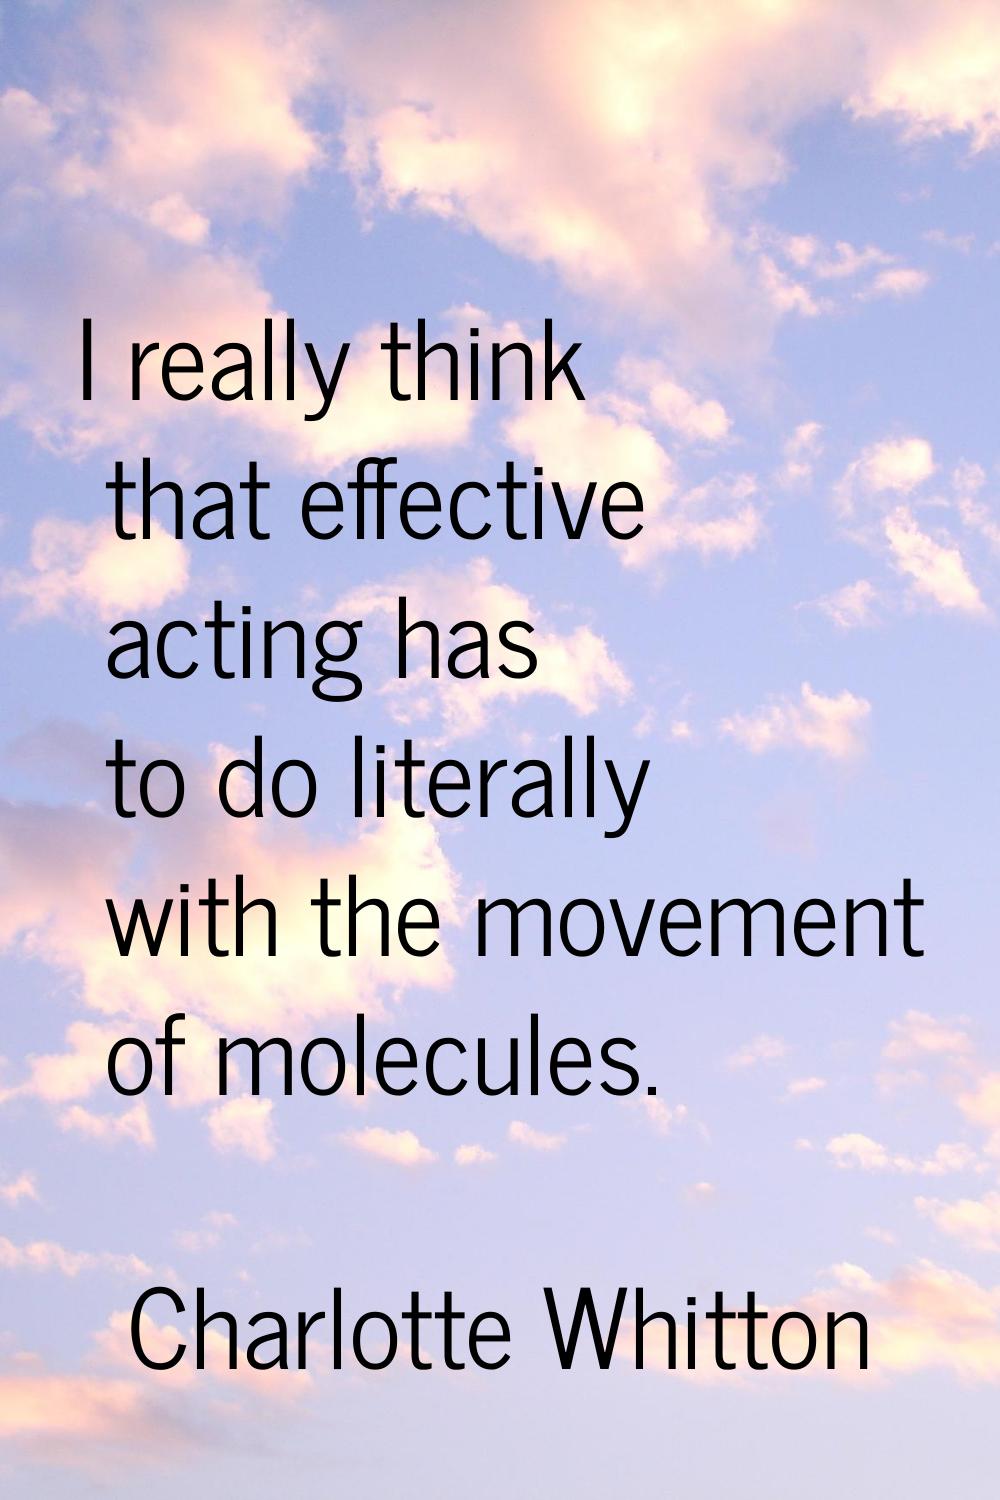 I really think that effective acting has to do literally with the movement of molecules.